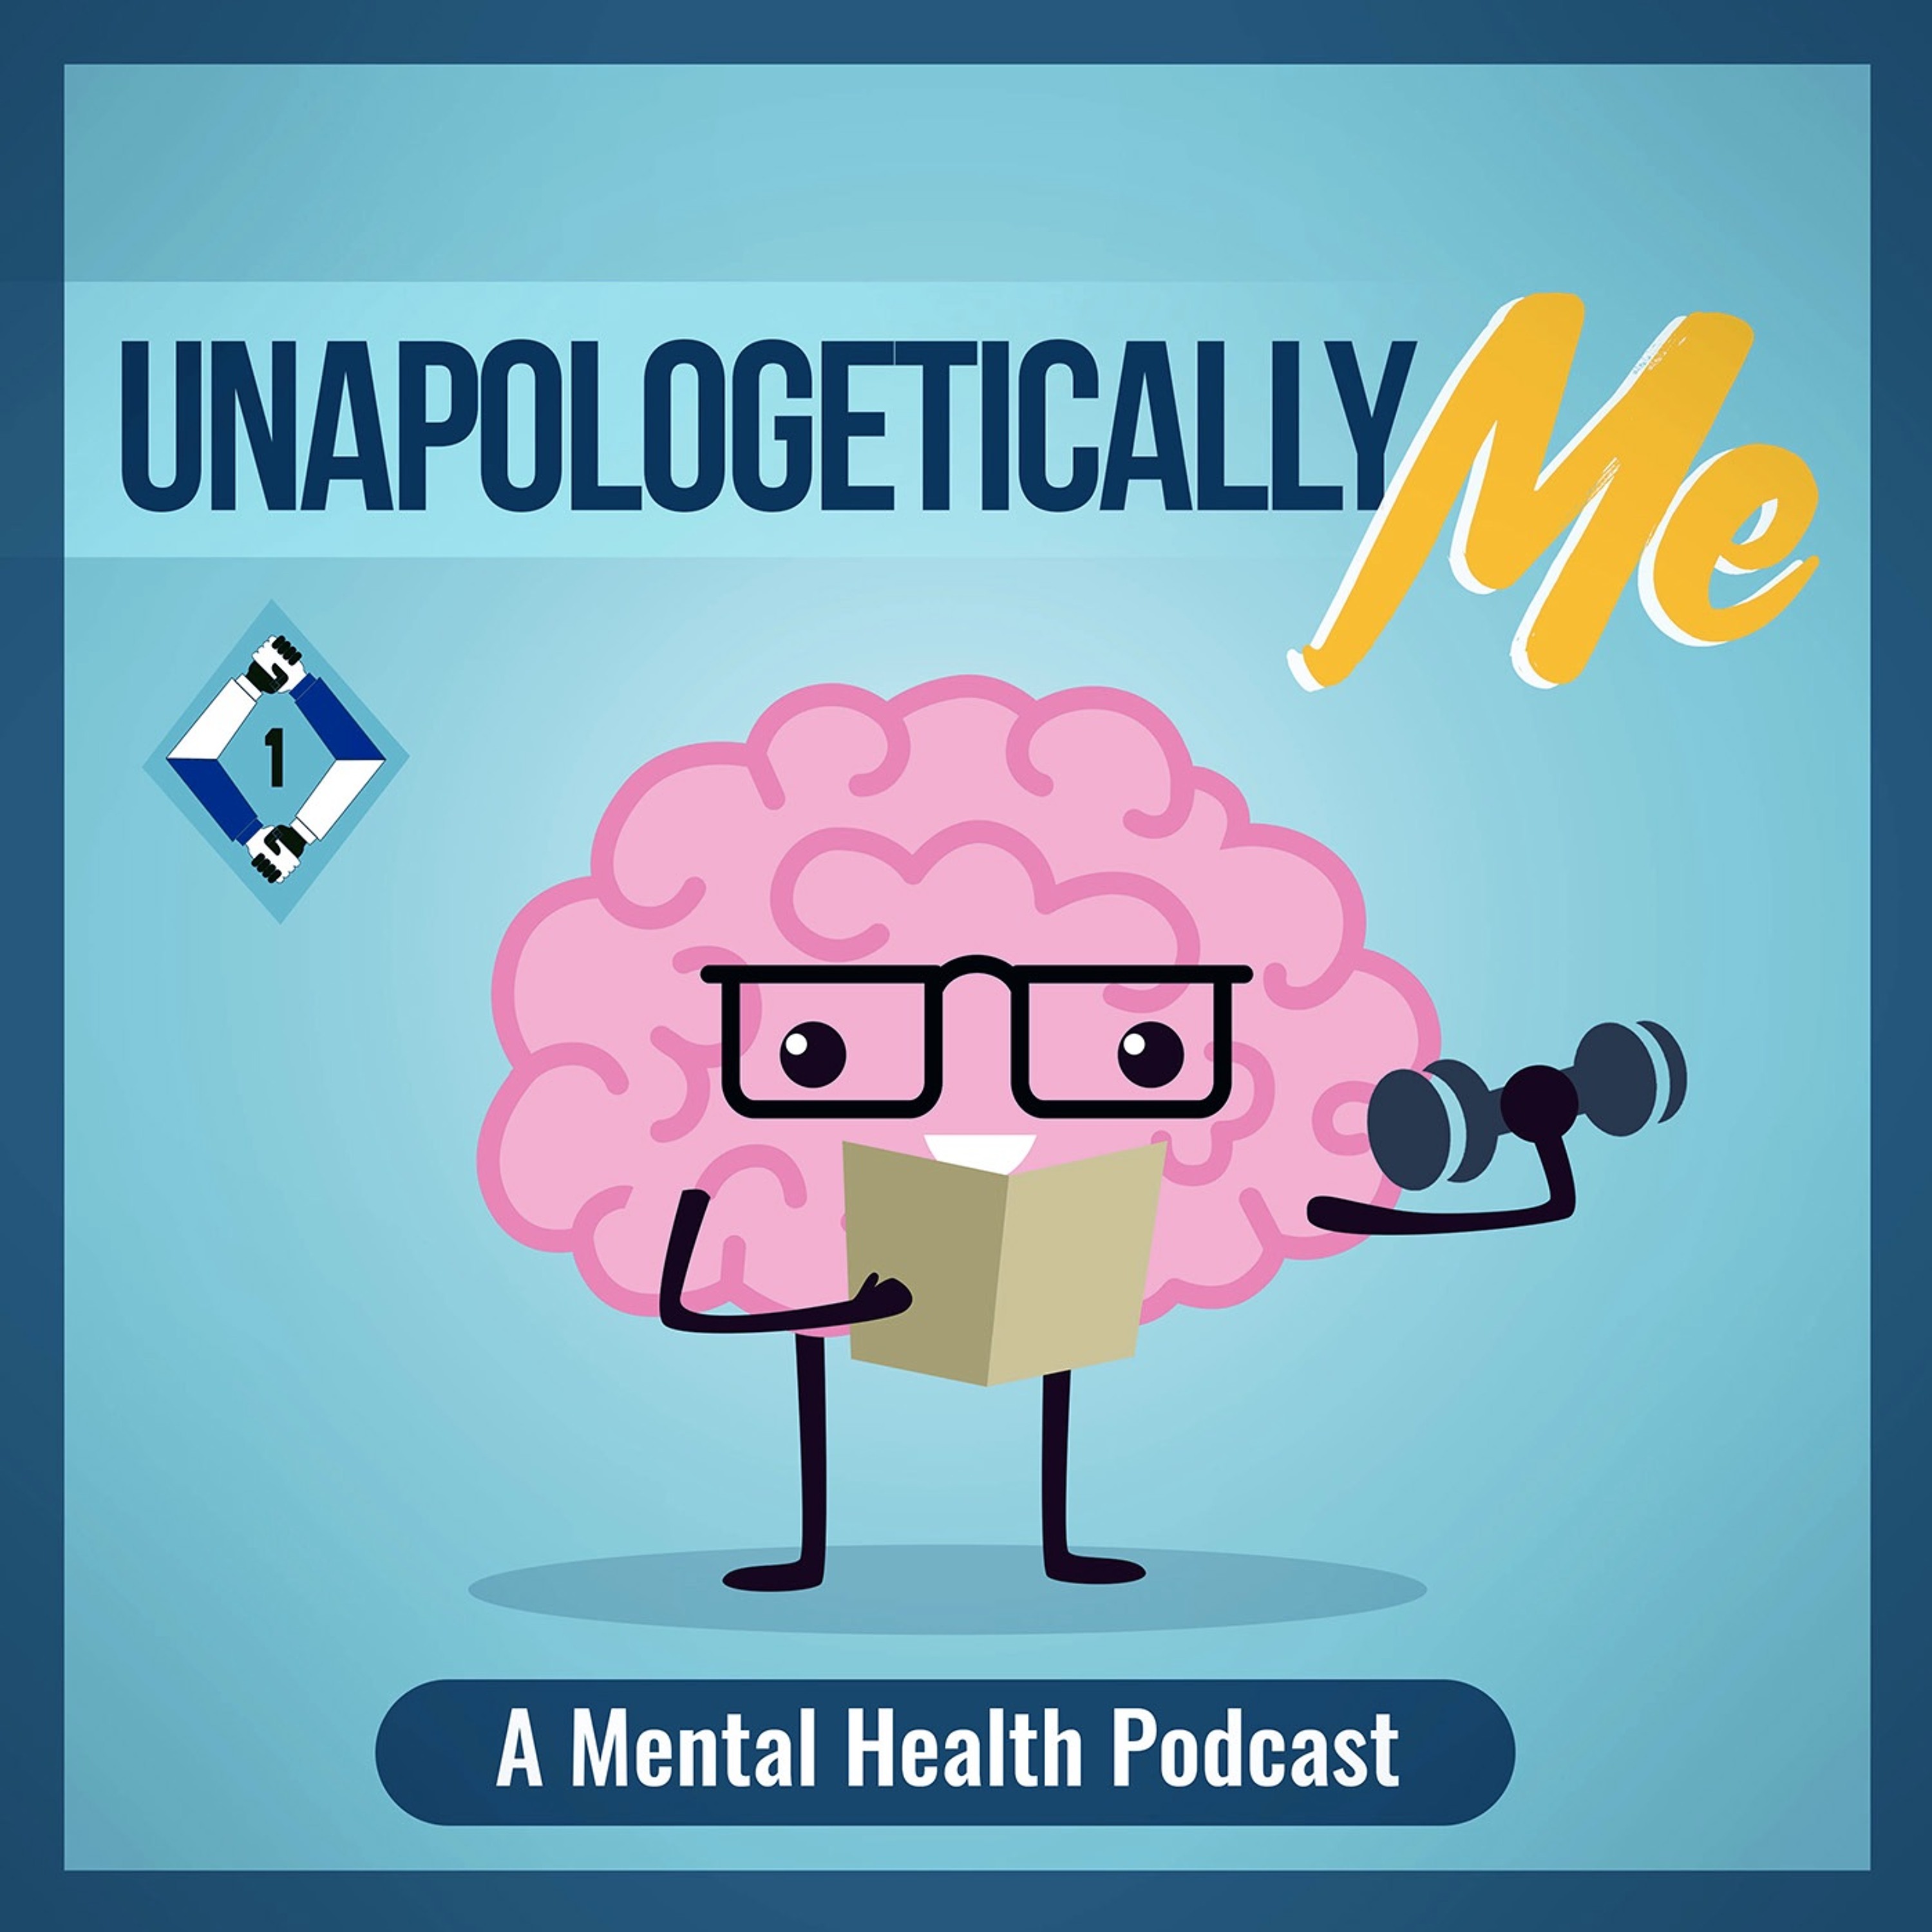 Unapologetically Me: A Mental Health Podcast - Health Tips Compilation #2